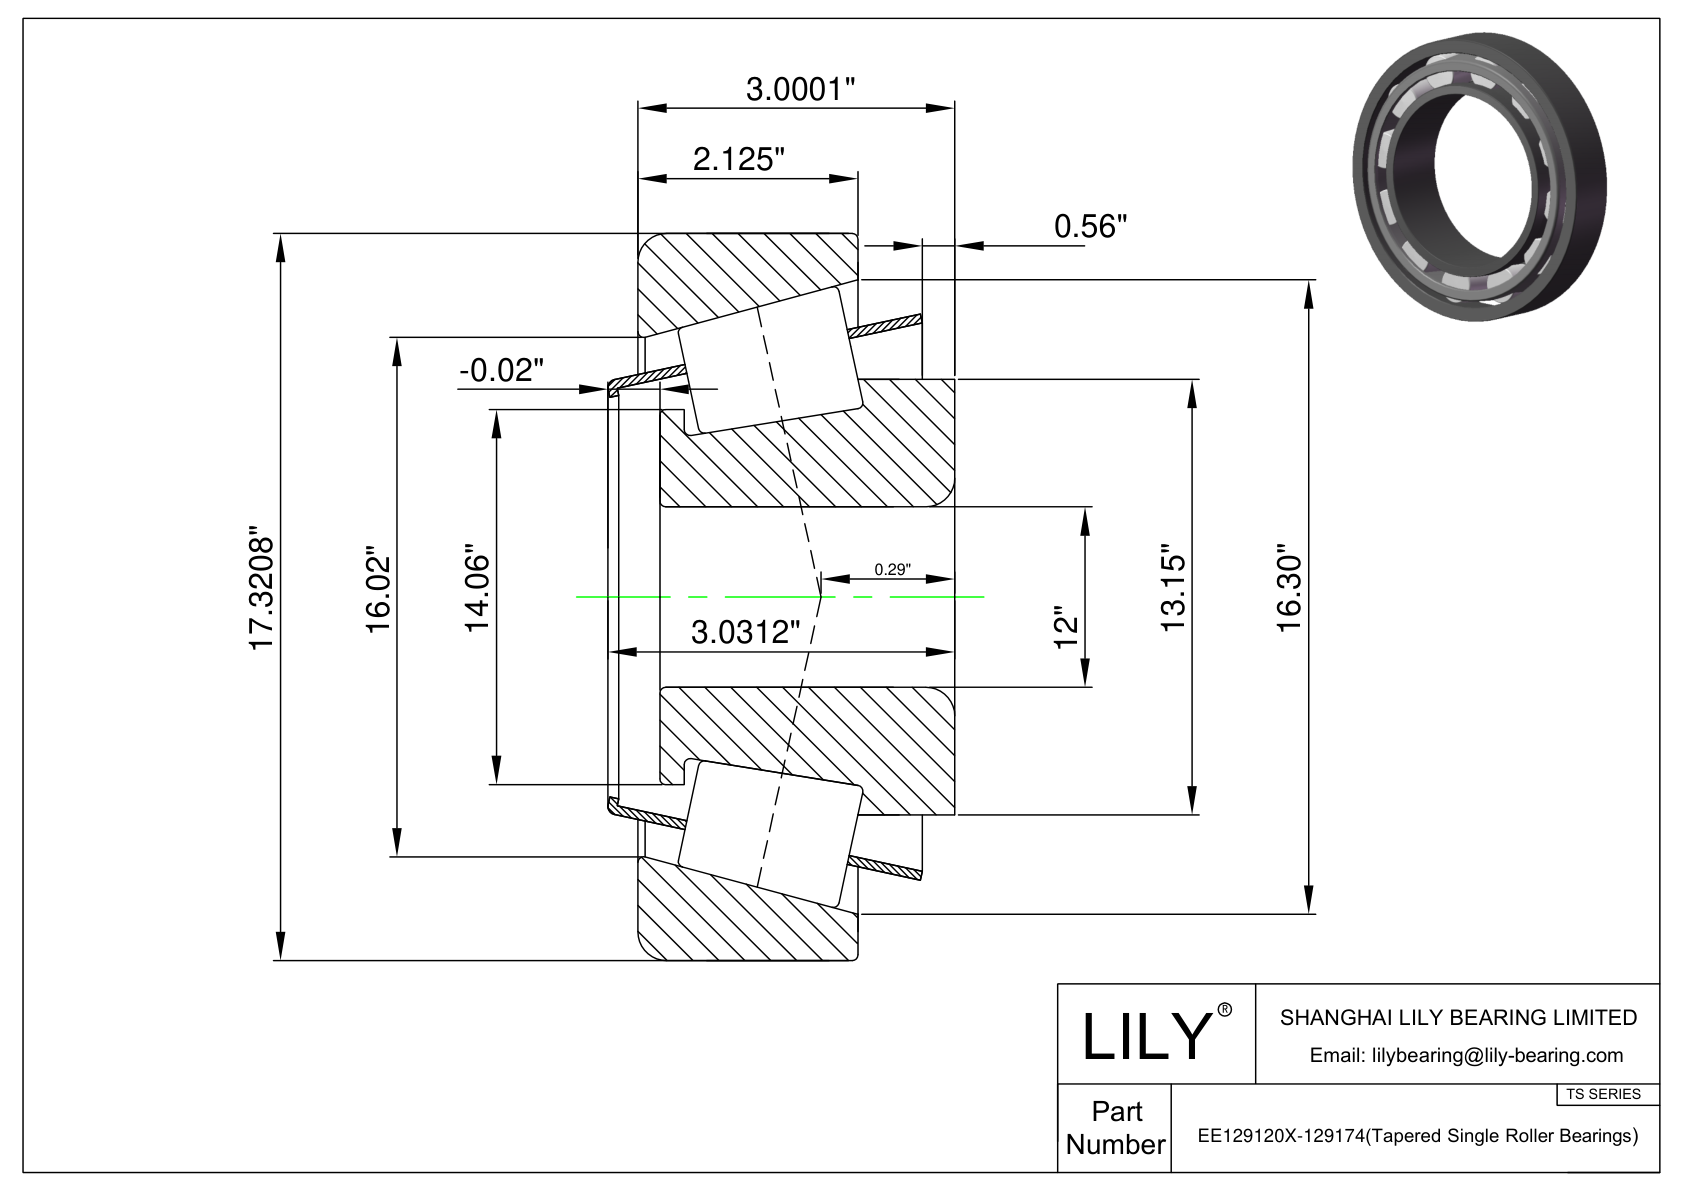 EE129120X-129174 TS (Tapered Single Roller Bearings) (Imperial) cad drawing